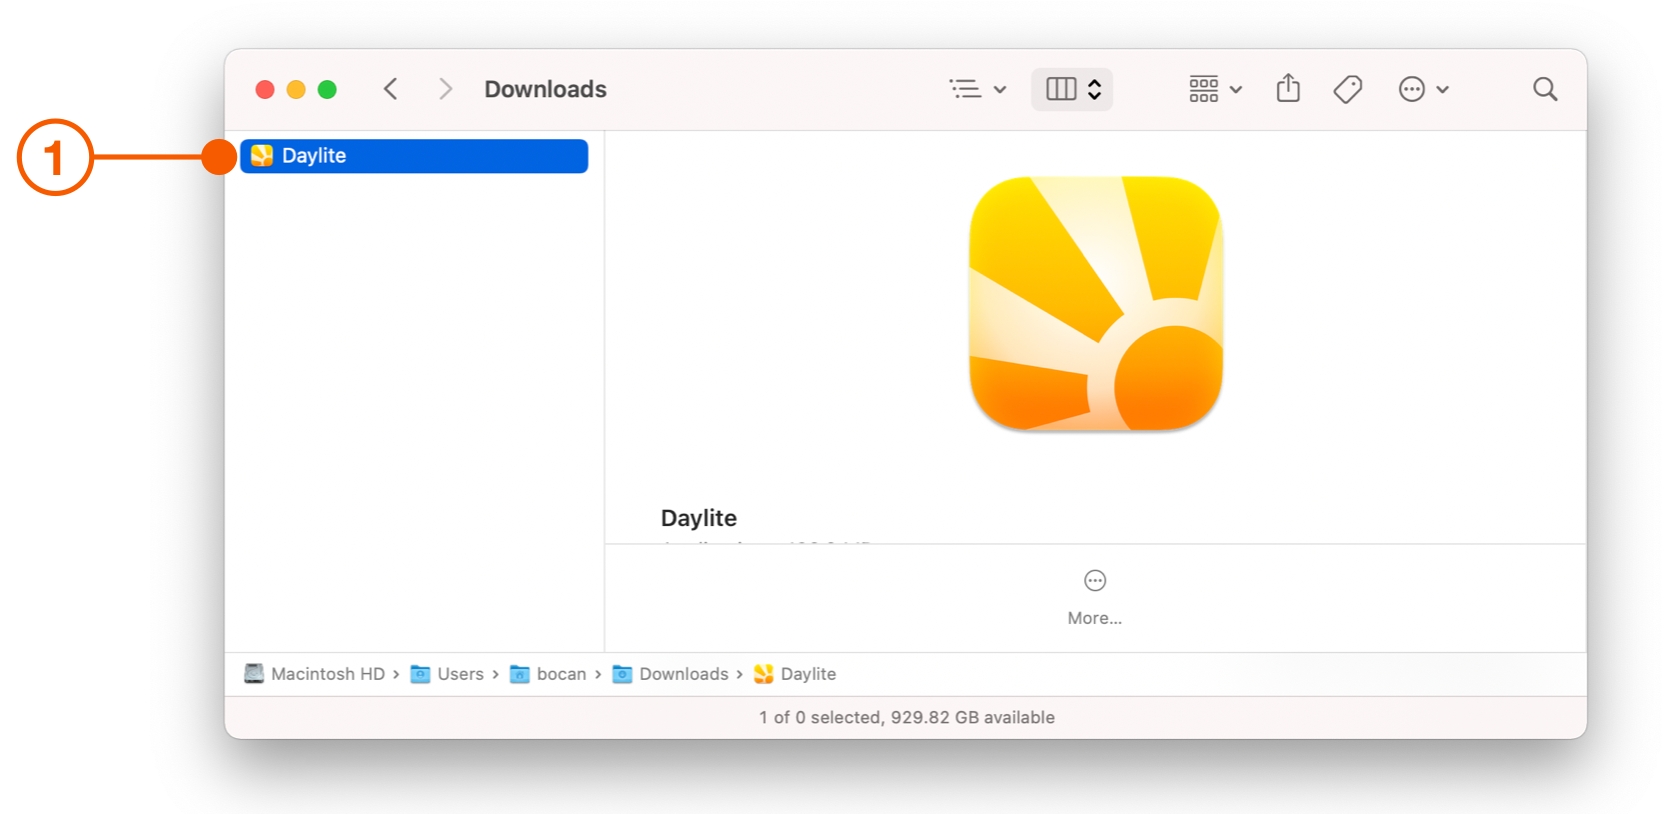 Applications folder with Daylite app selected